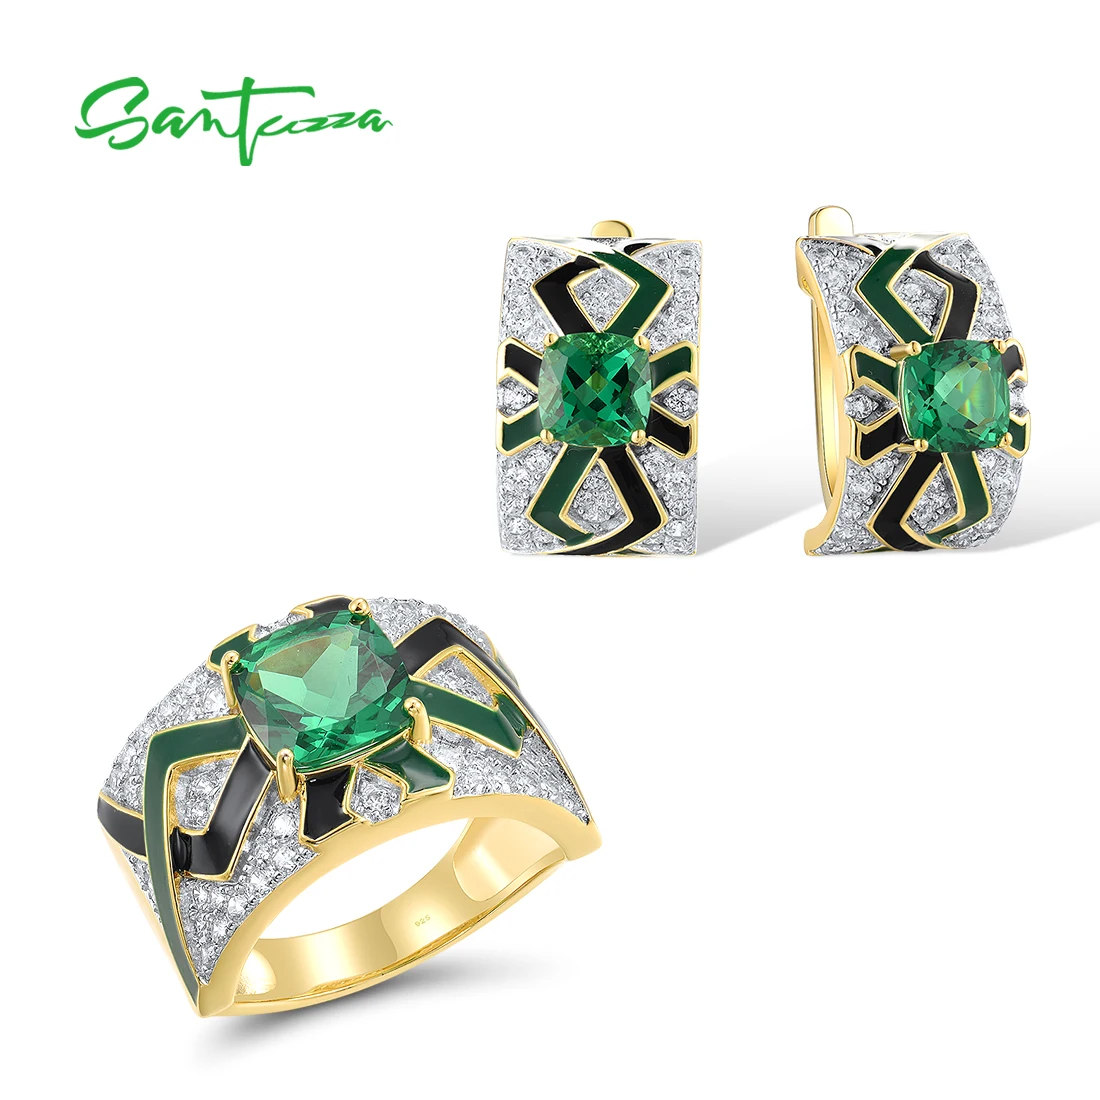 

SANTUZZA Real 925 Sterling Silver Jewelry Set For Woman Sparkling White CZ Green Spinel Enamel Ring Earrings Sets Fine Jewelry